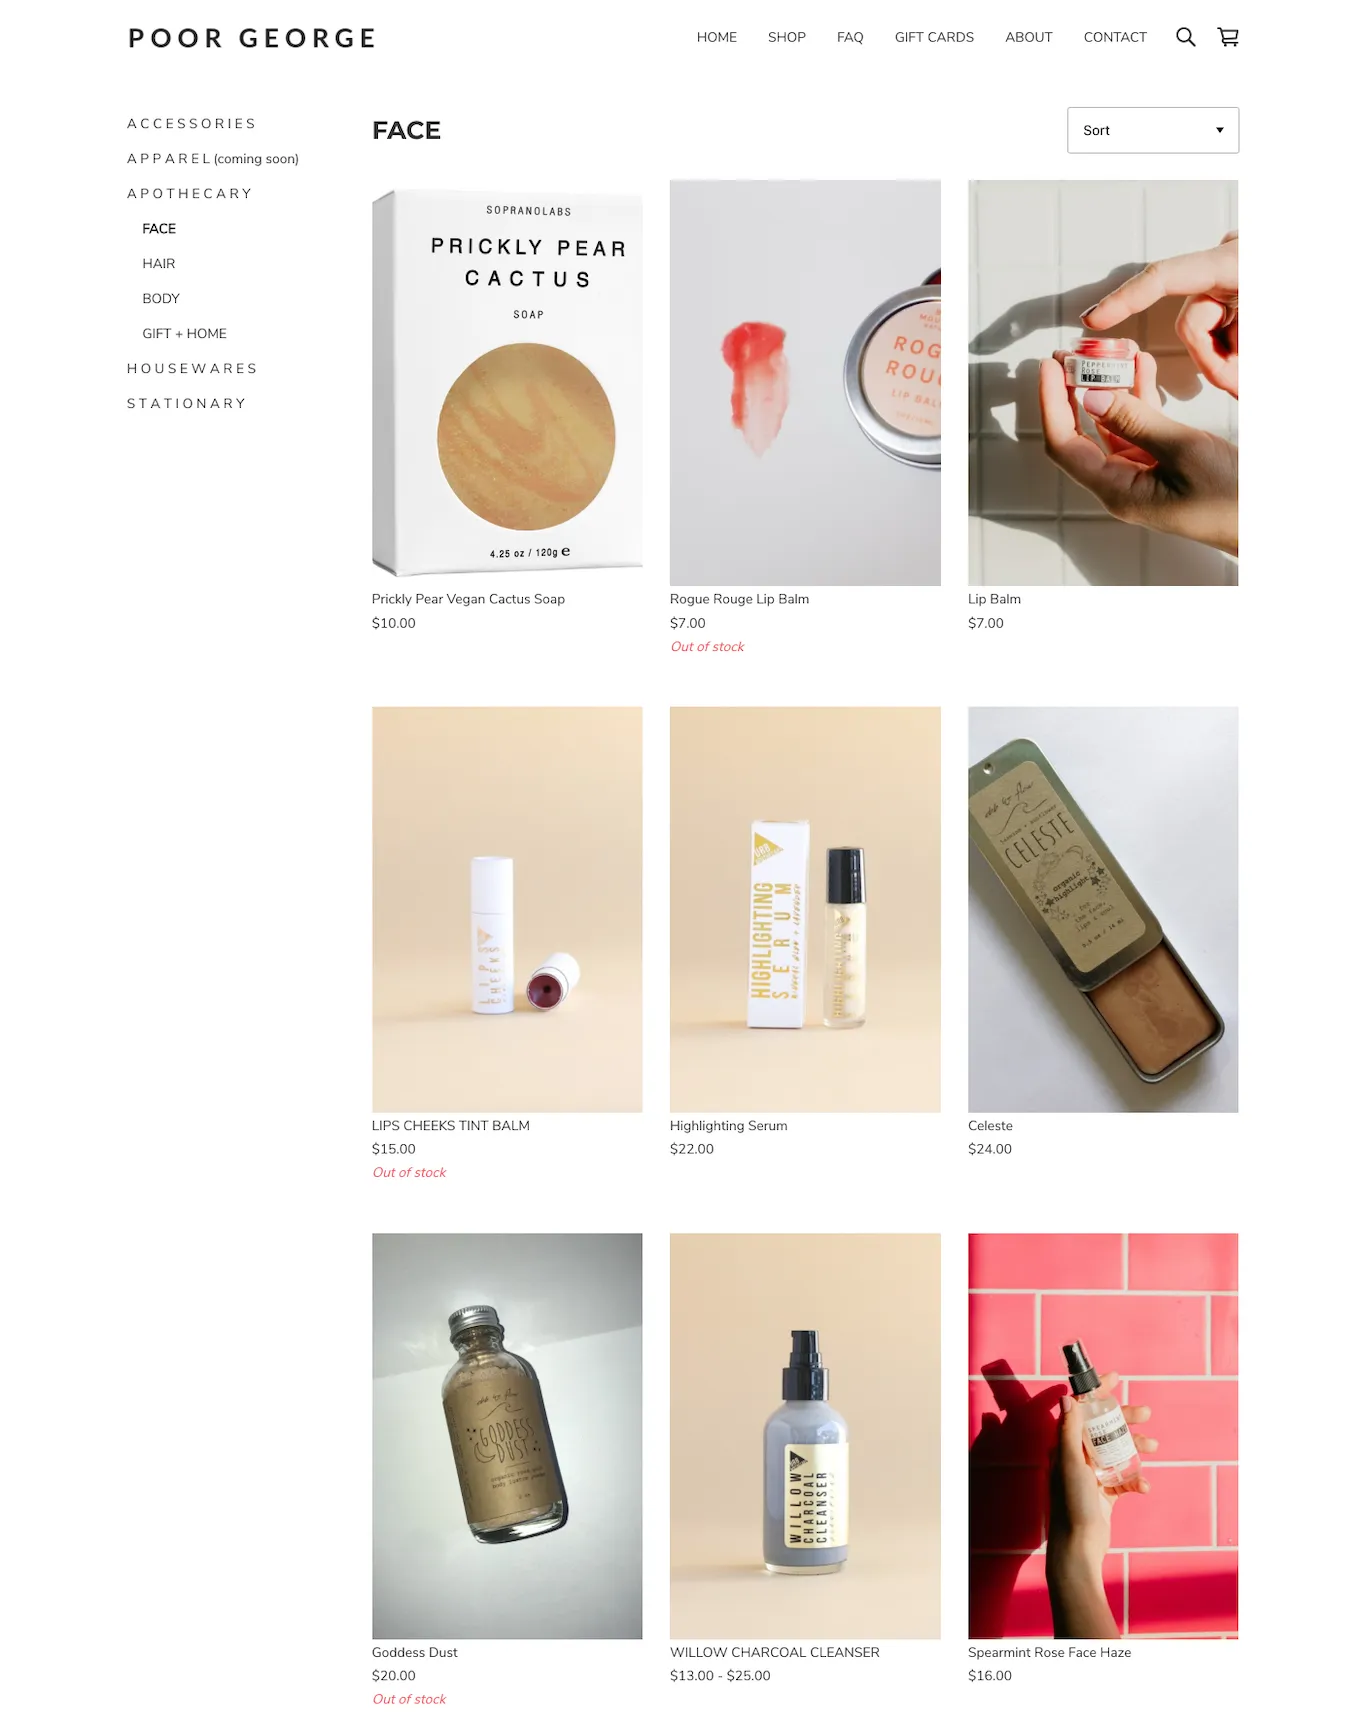 blog poor-george-apothecary-face-product-category